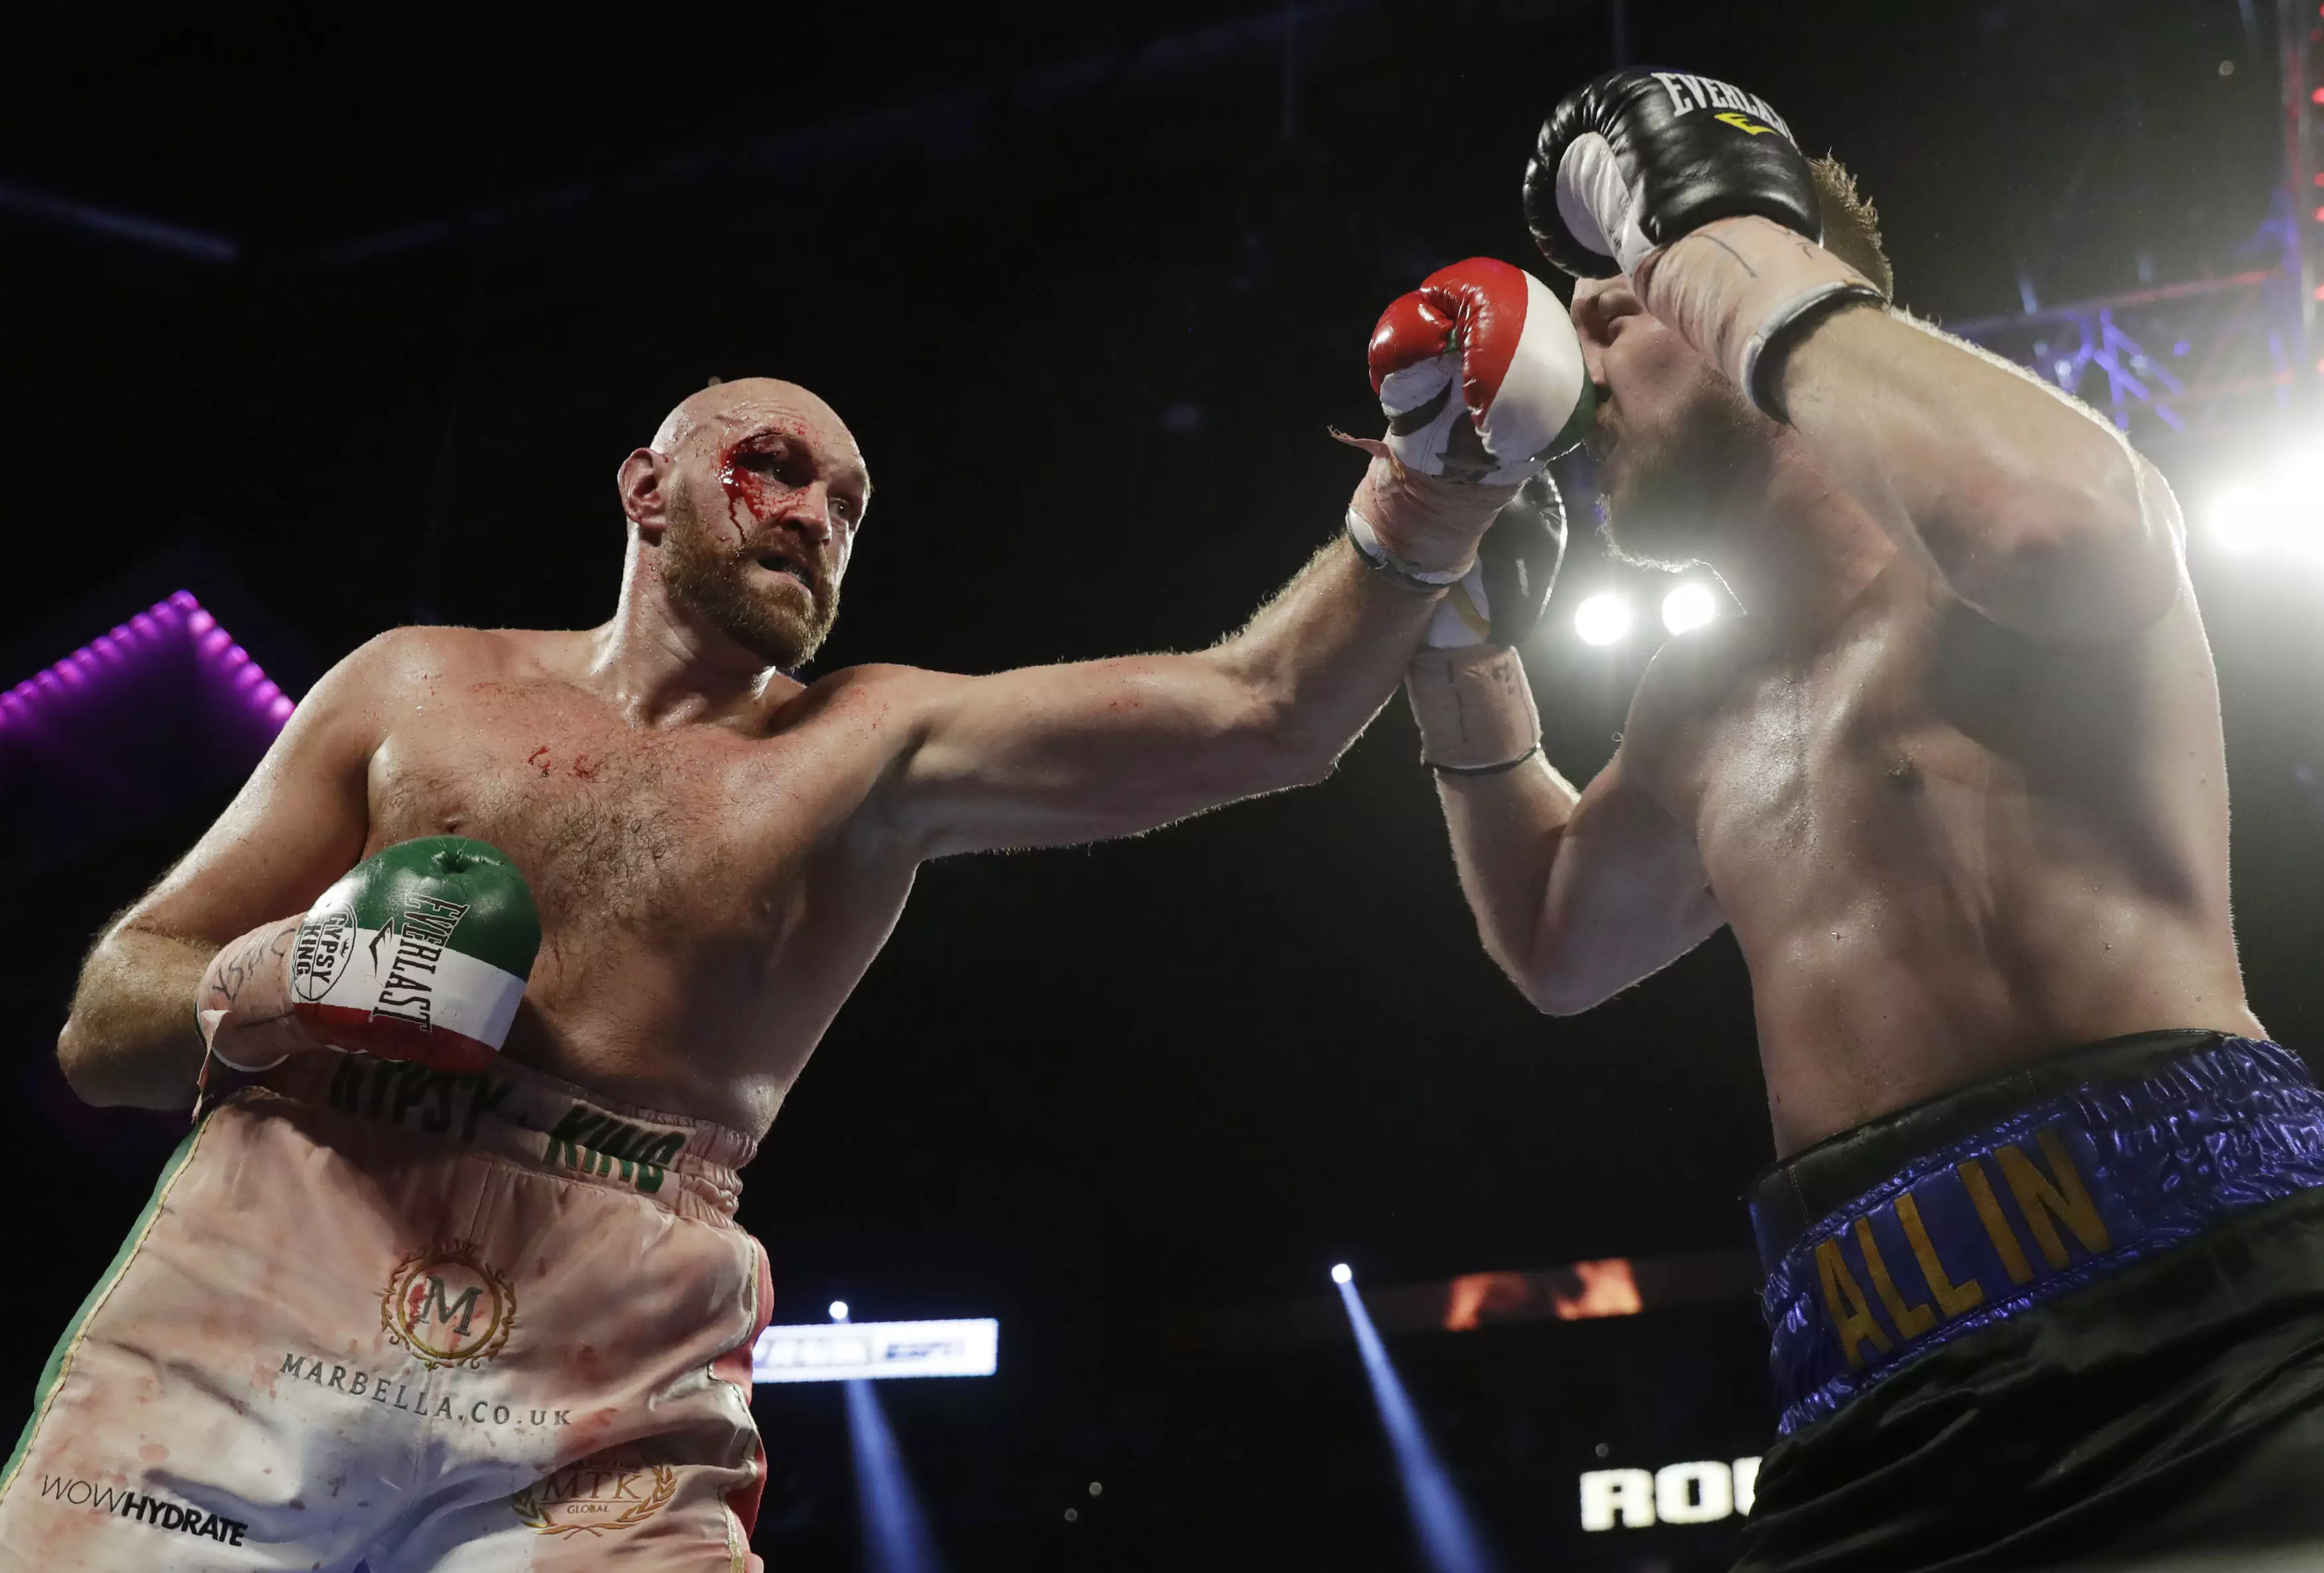 Fury suffered a nasty cut eye during his most recent fight in September. Image: PA Images